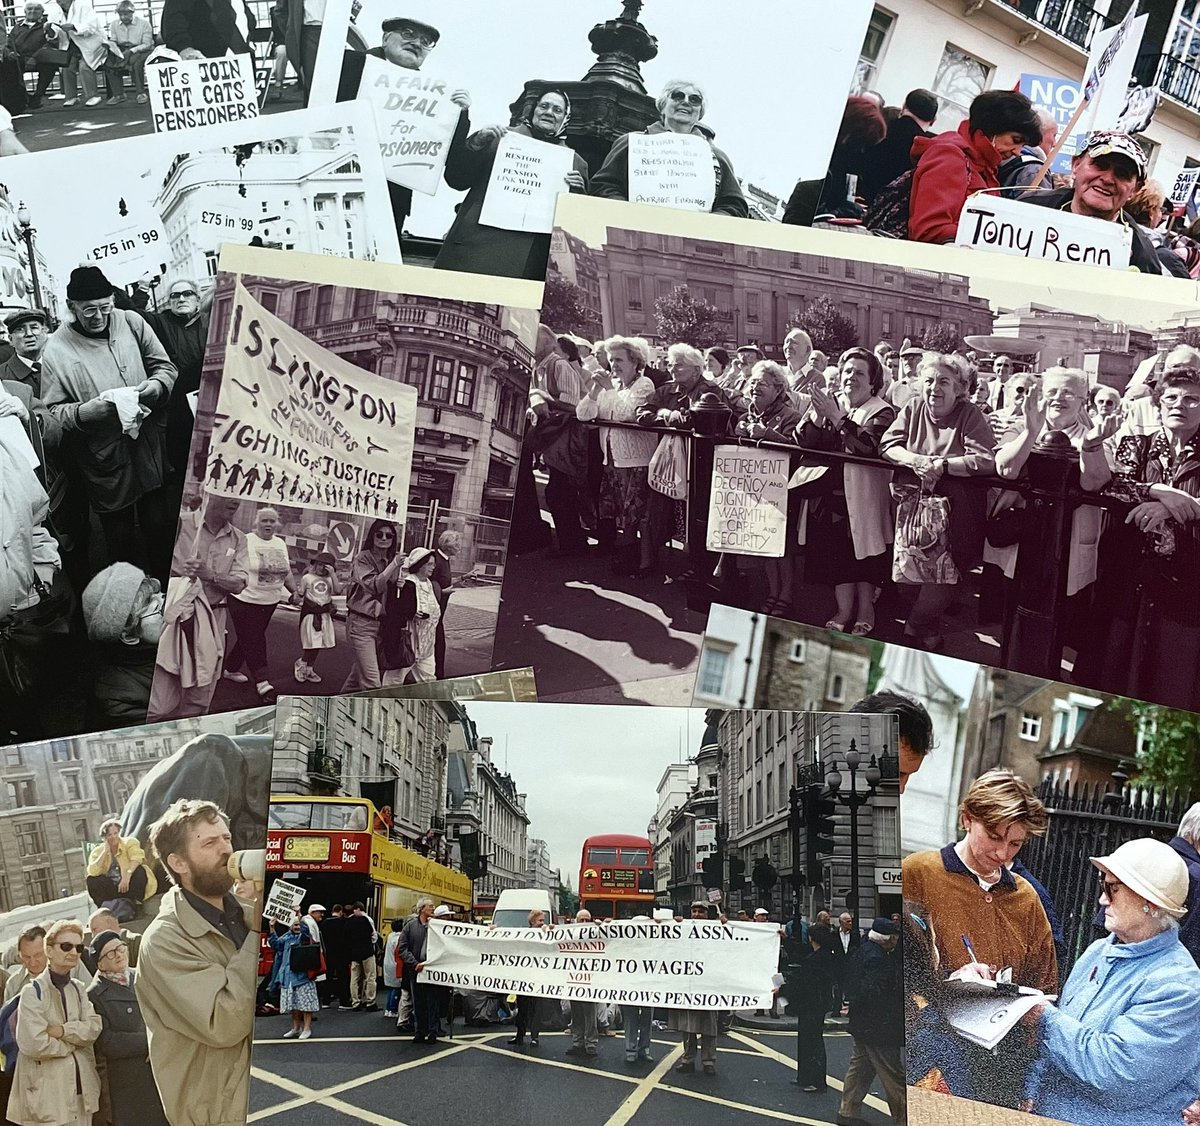 The GLPA collection includes wonderful photographs or marches, activism, petitioning work, and the political figures that supported the movement. (3/3) #PensionActivism #LondonHistory #Archives